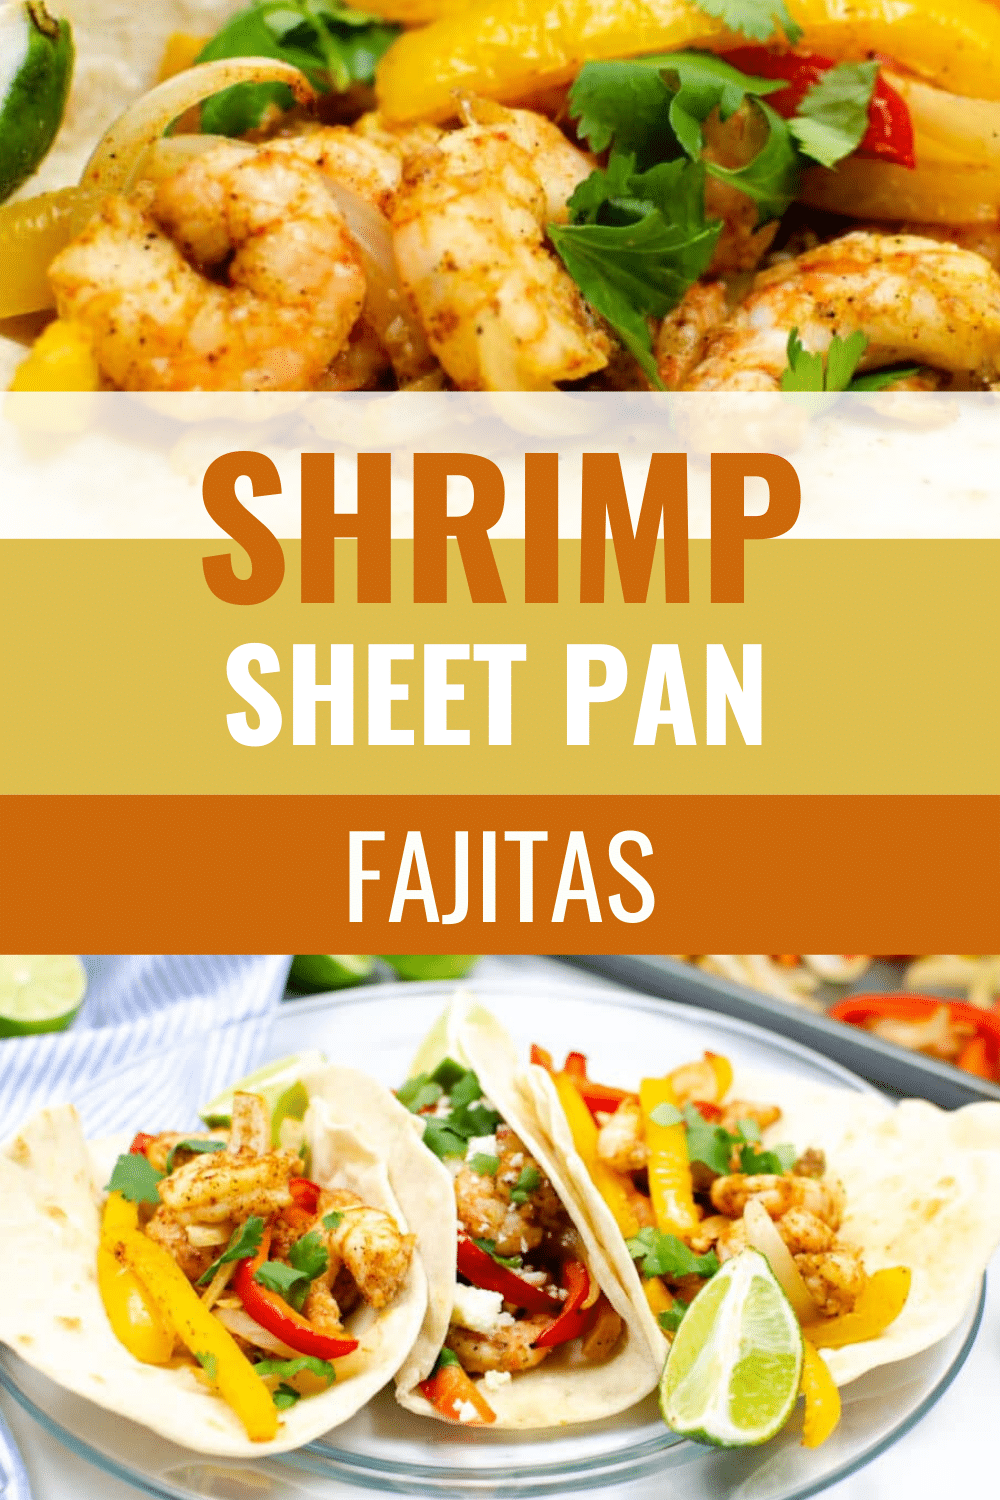 Shrimp Sheet Pan Fajitas Recipe is a fast and simple dinner recipe that is loaded with flavor. Fast, easy, and delicious. #shrimpfajitas #sheetpandinner #recipe #fajitas #dinner via @wondermomwannab